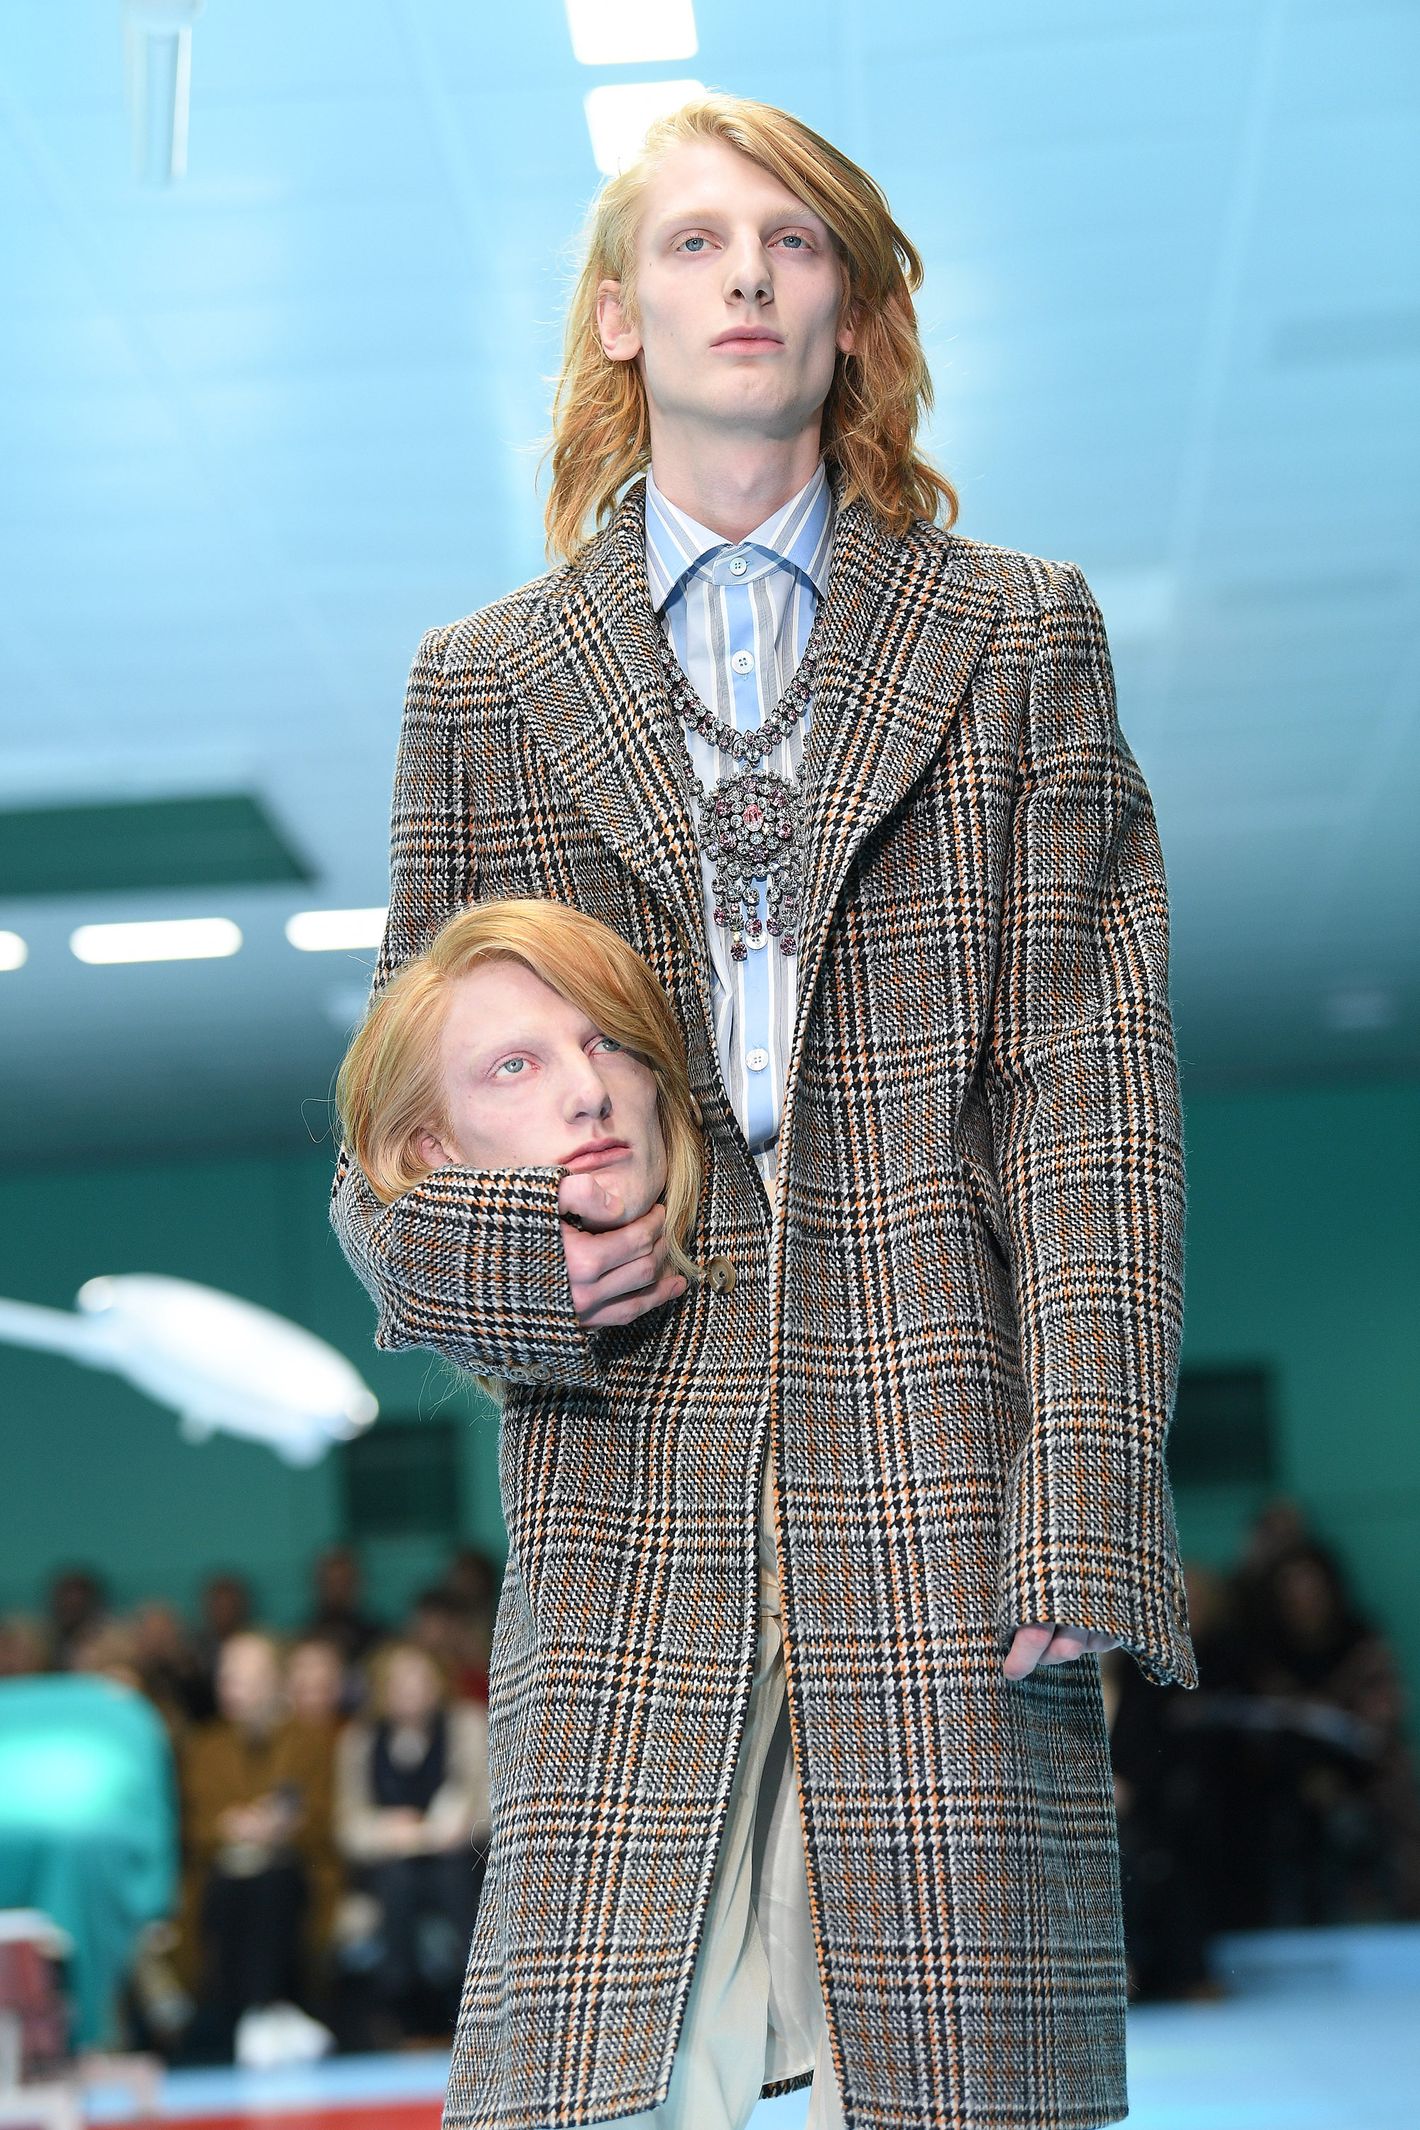 Gucci Model Unia Pakhomova Talks About Carrying Her Own Head